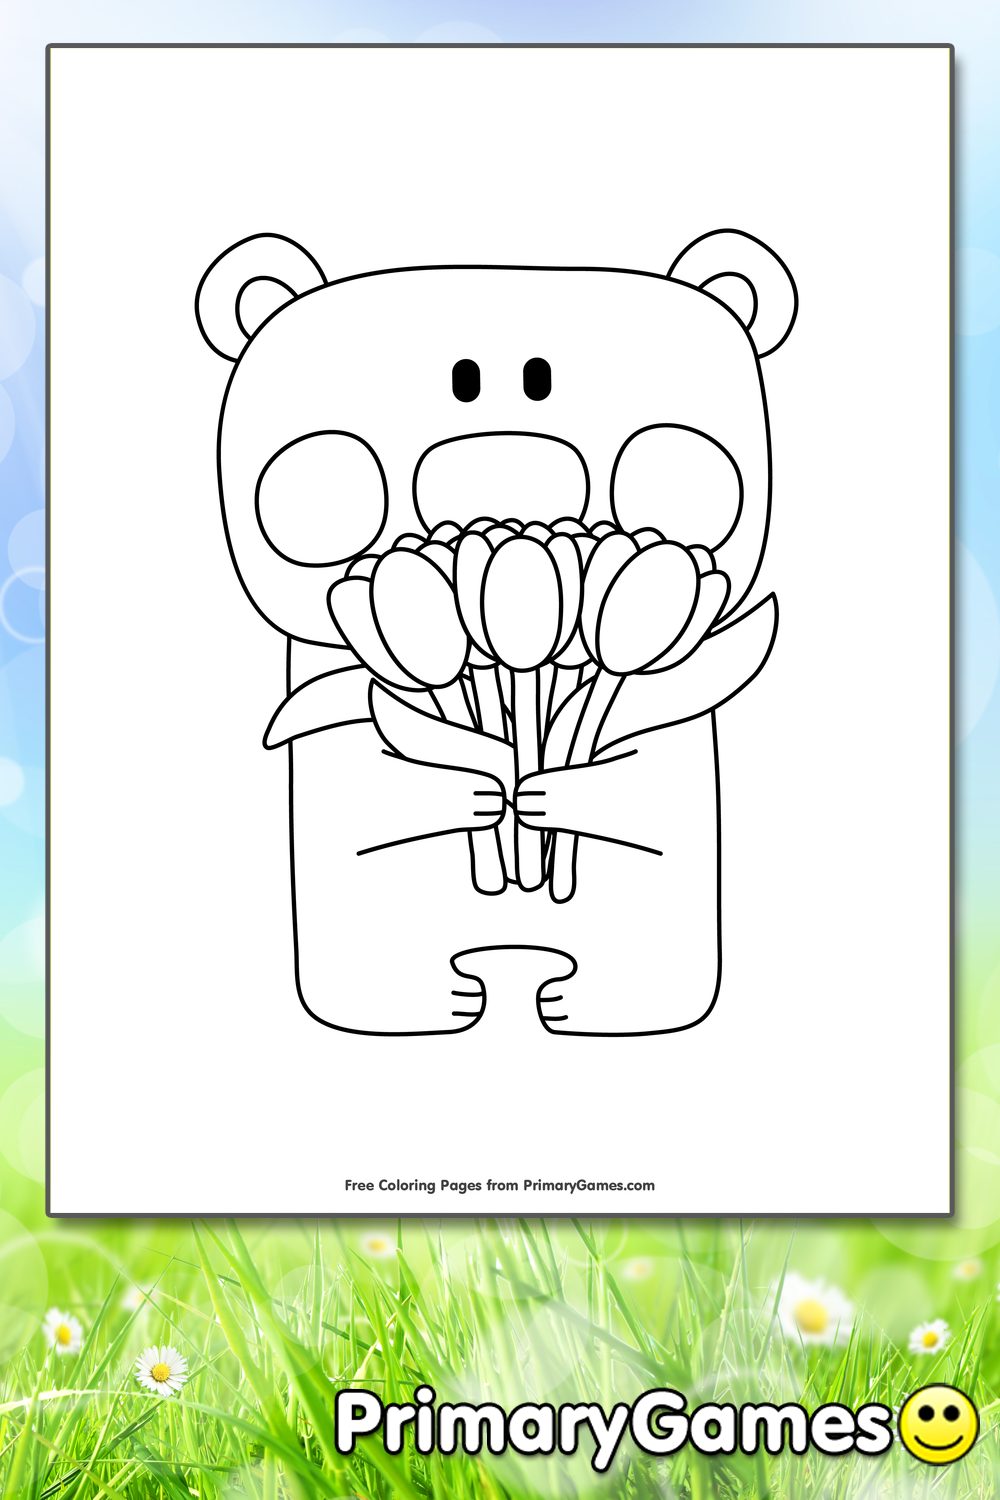 Bear with Tulips Coloring Page • FREE Printable PDF from PrimaryGames